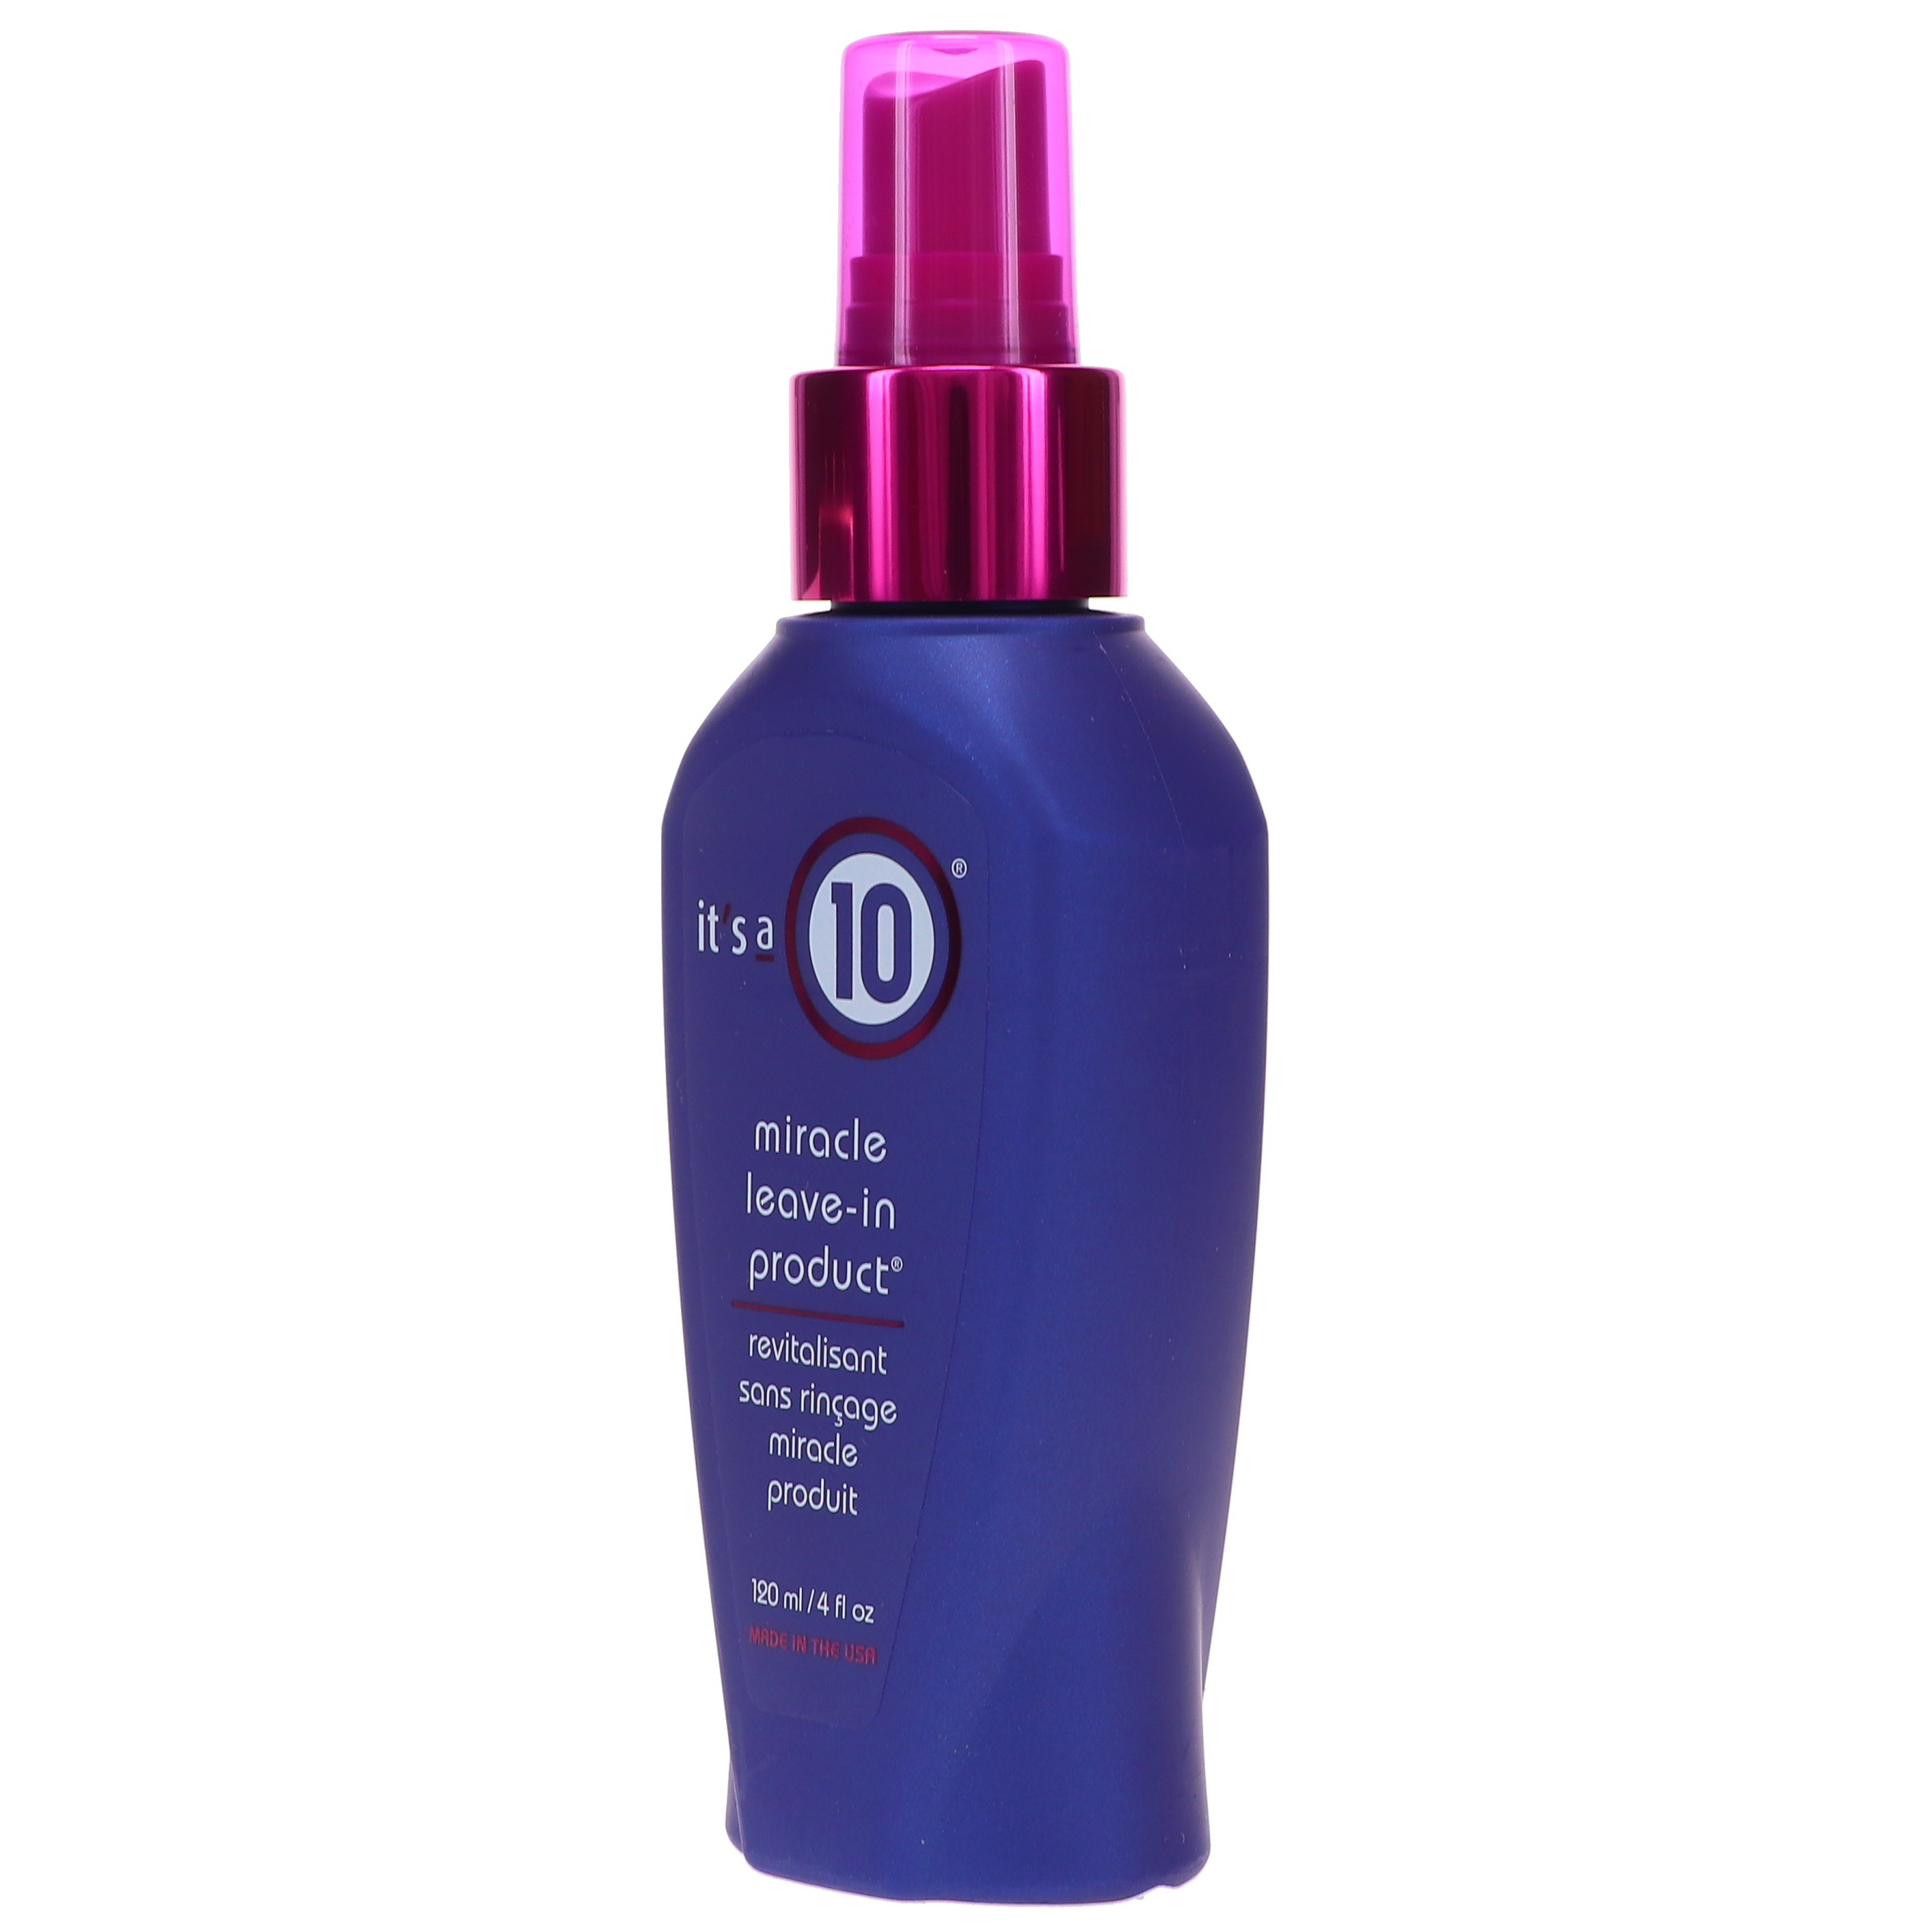 It's a 10 Miracle Leave-in Product 4 oz - image 2 of 8